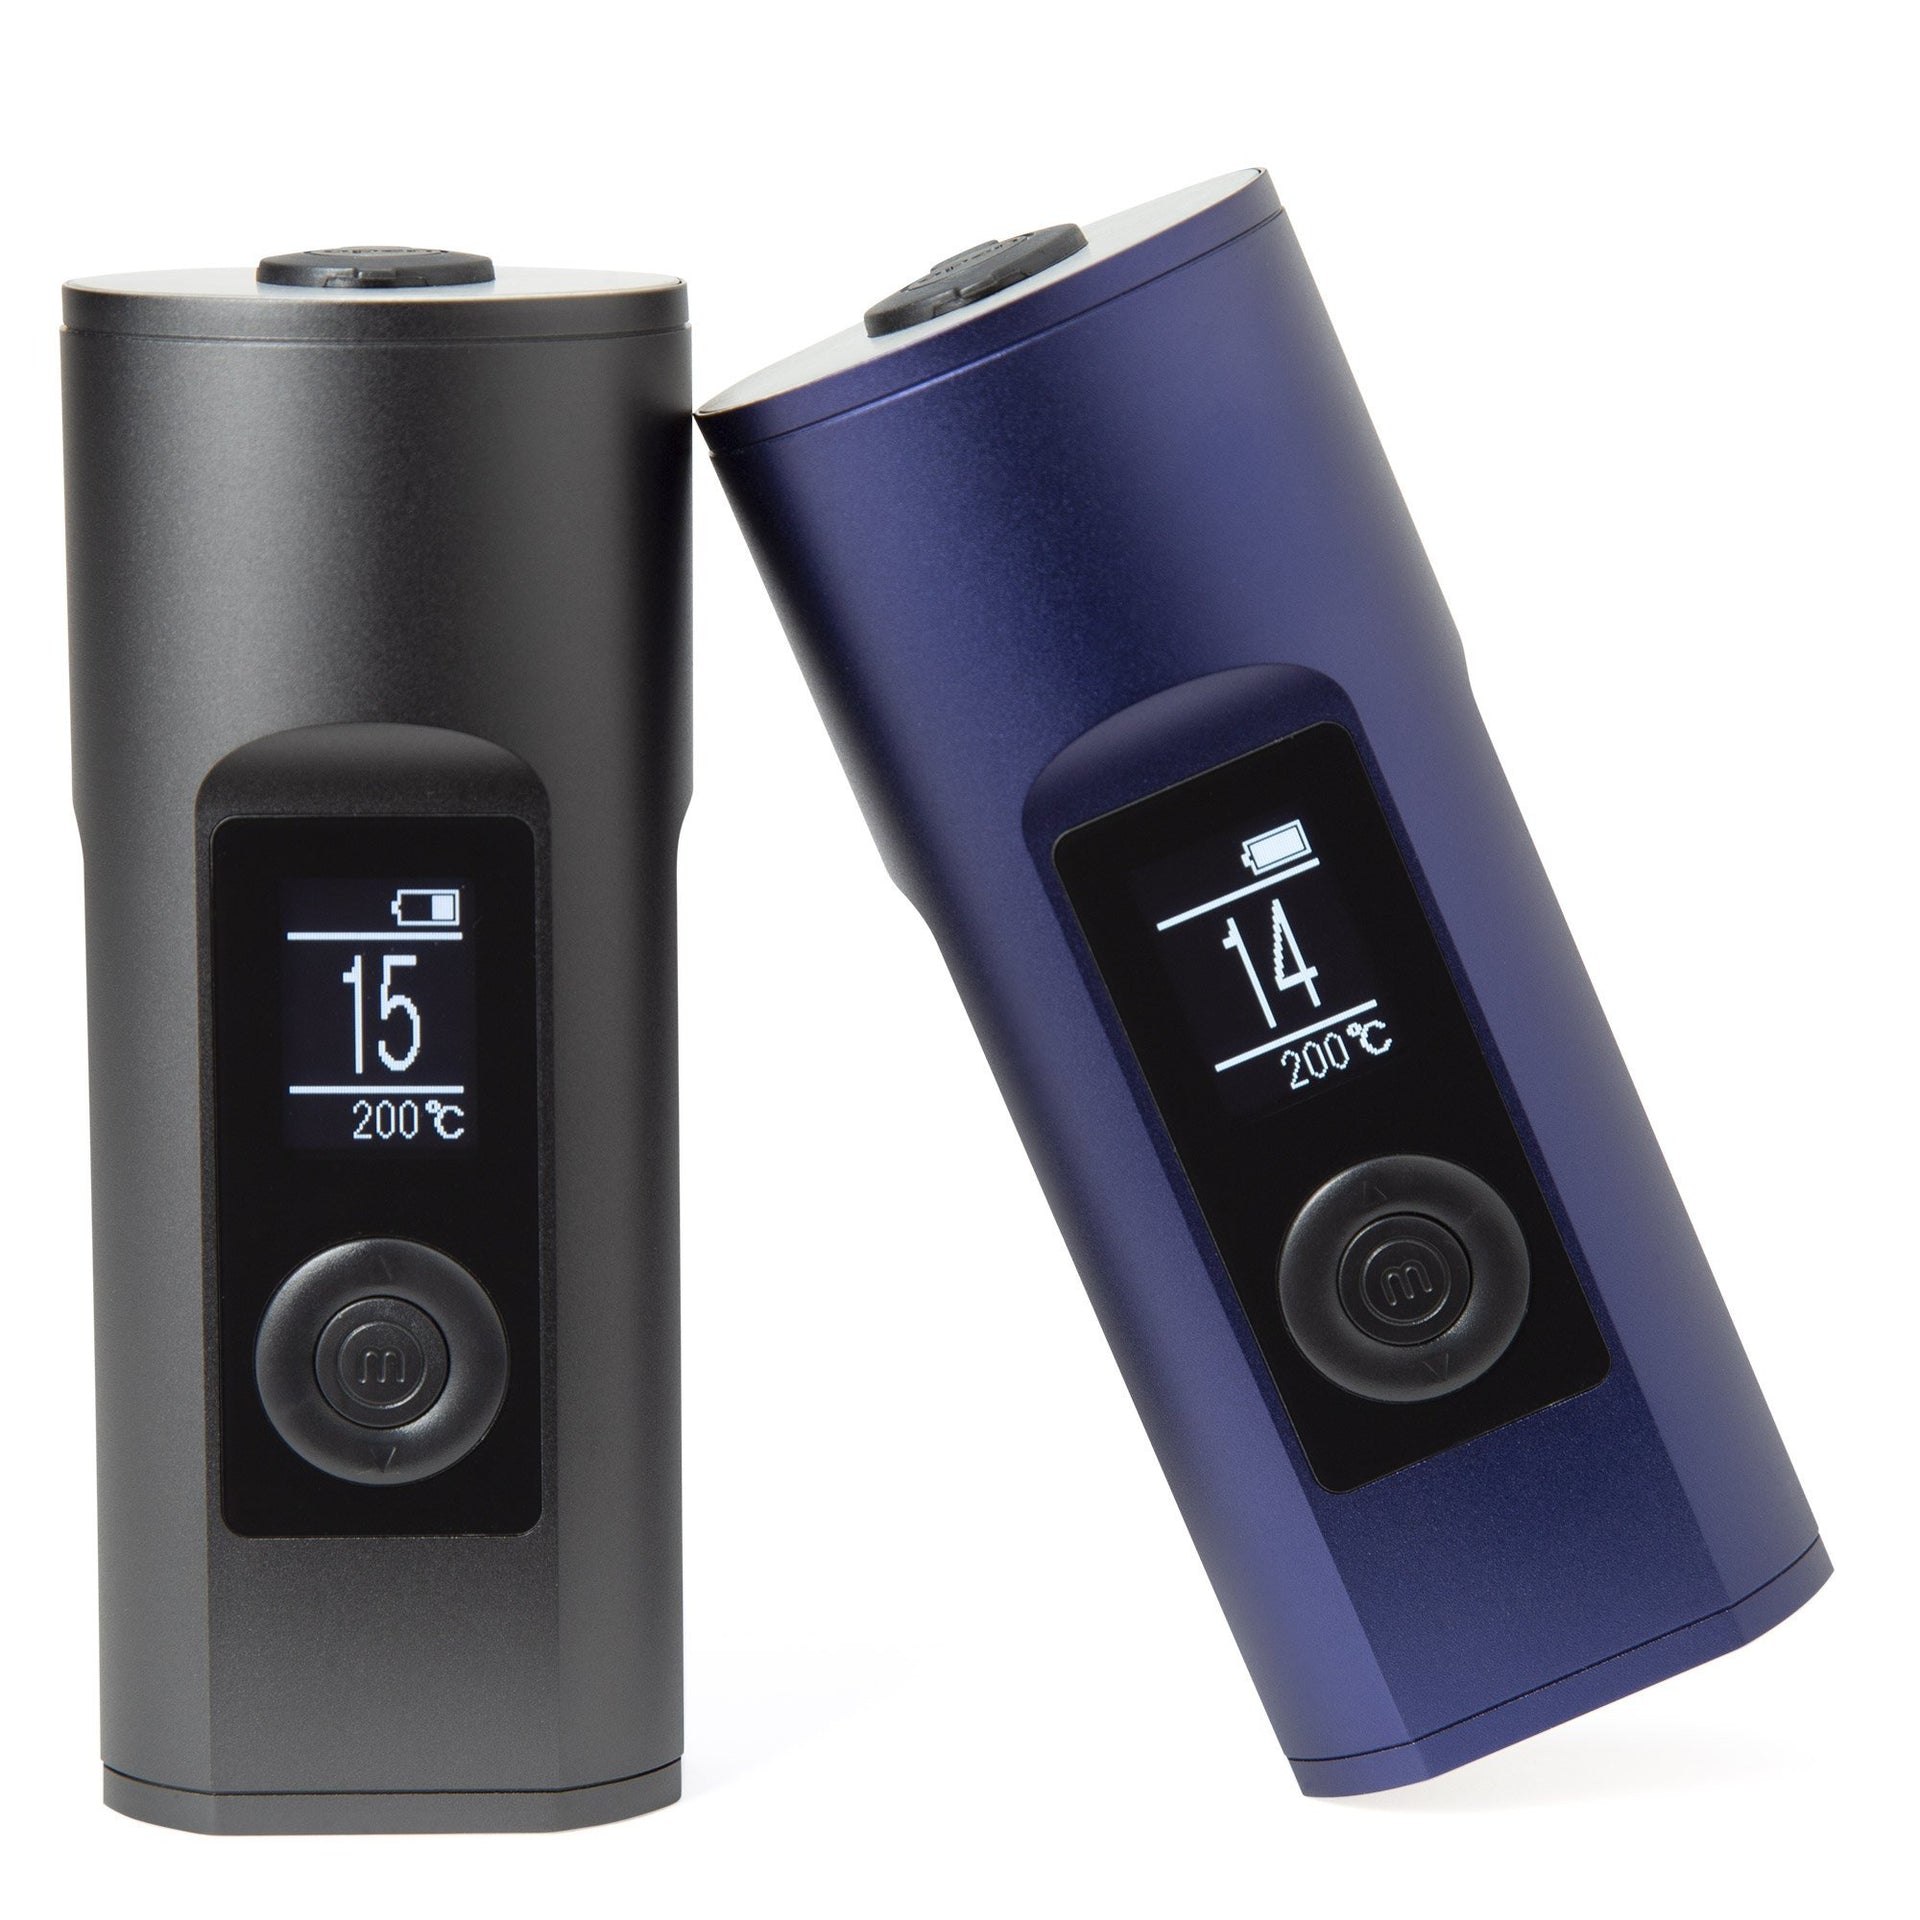 Arizer Air Solo II Portable Dry Herb Vaporizer / $ 219.99 at 420 Science